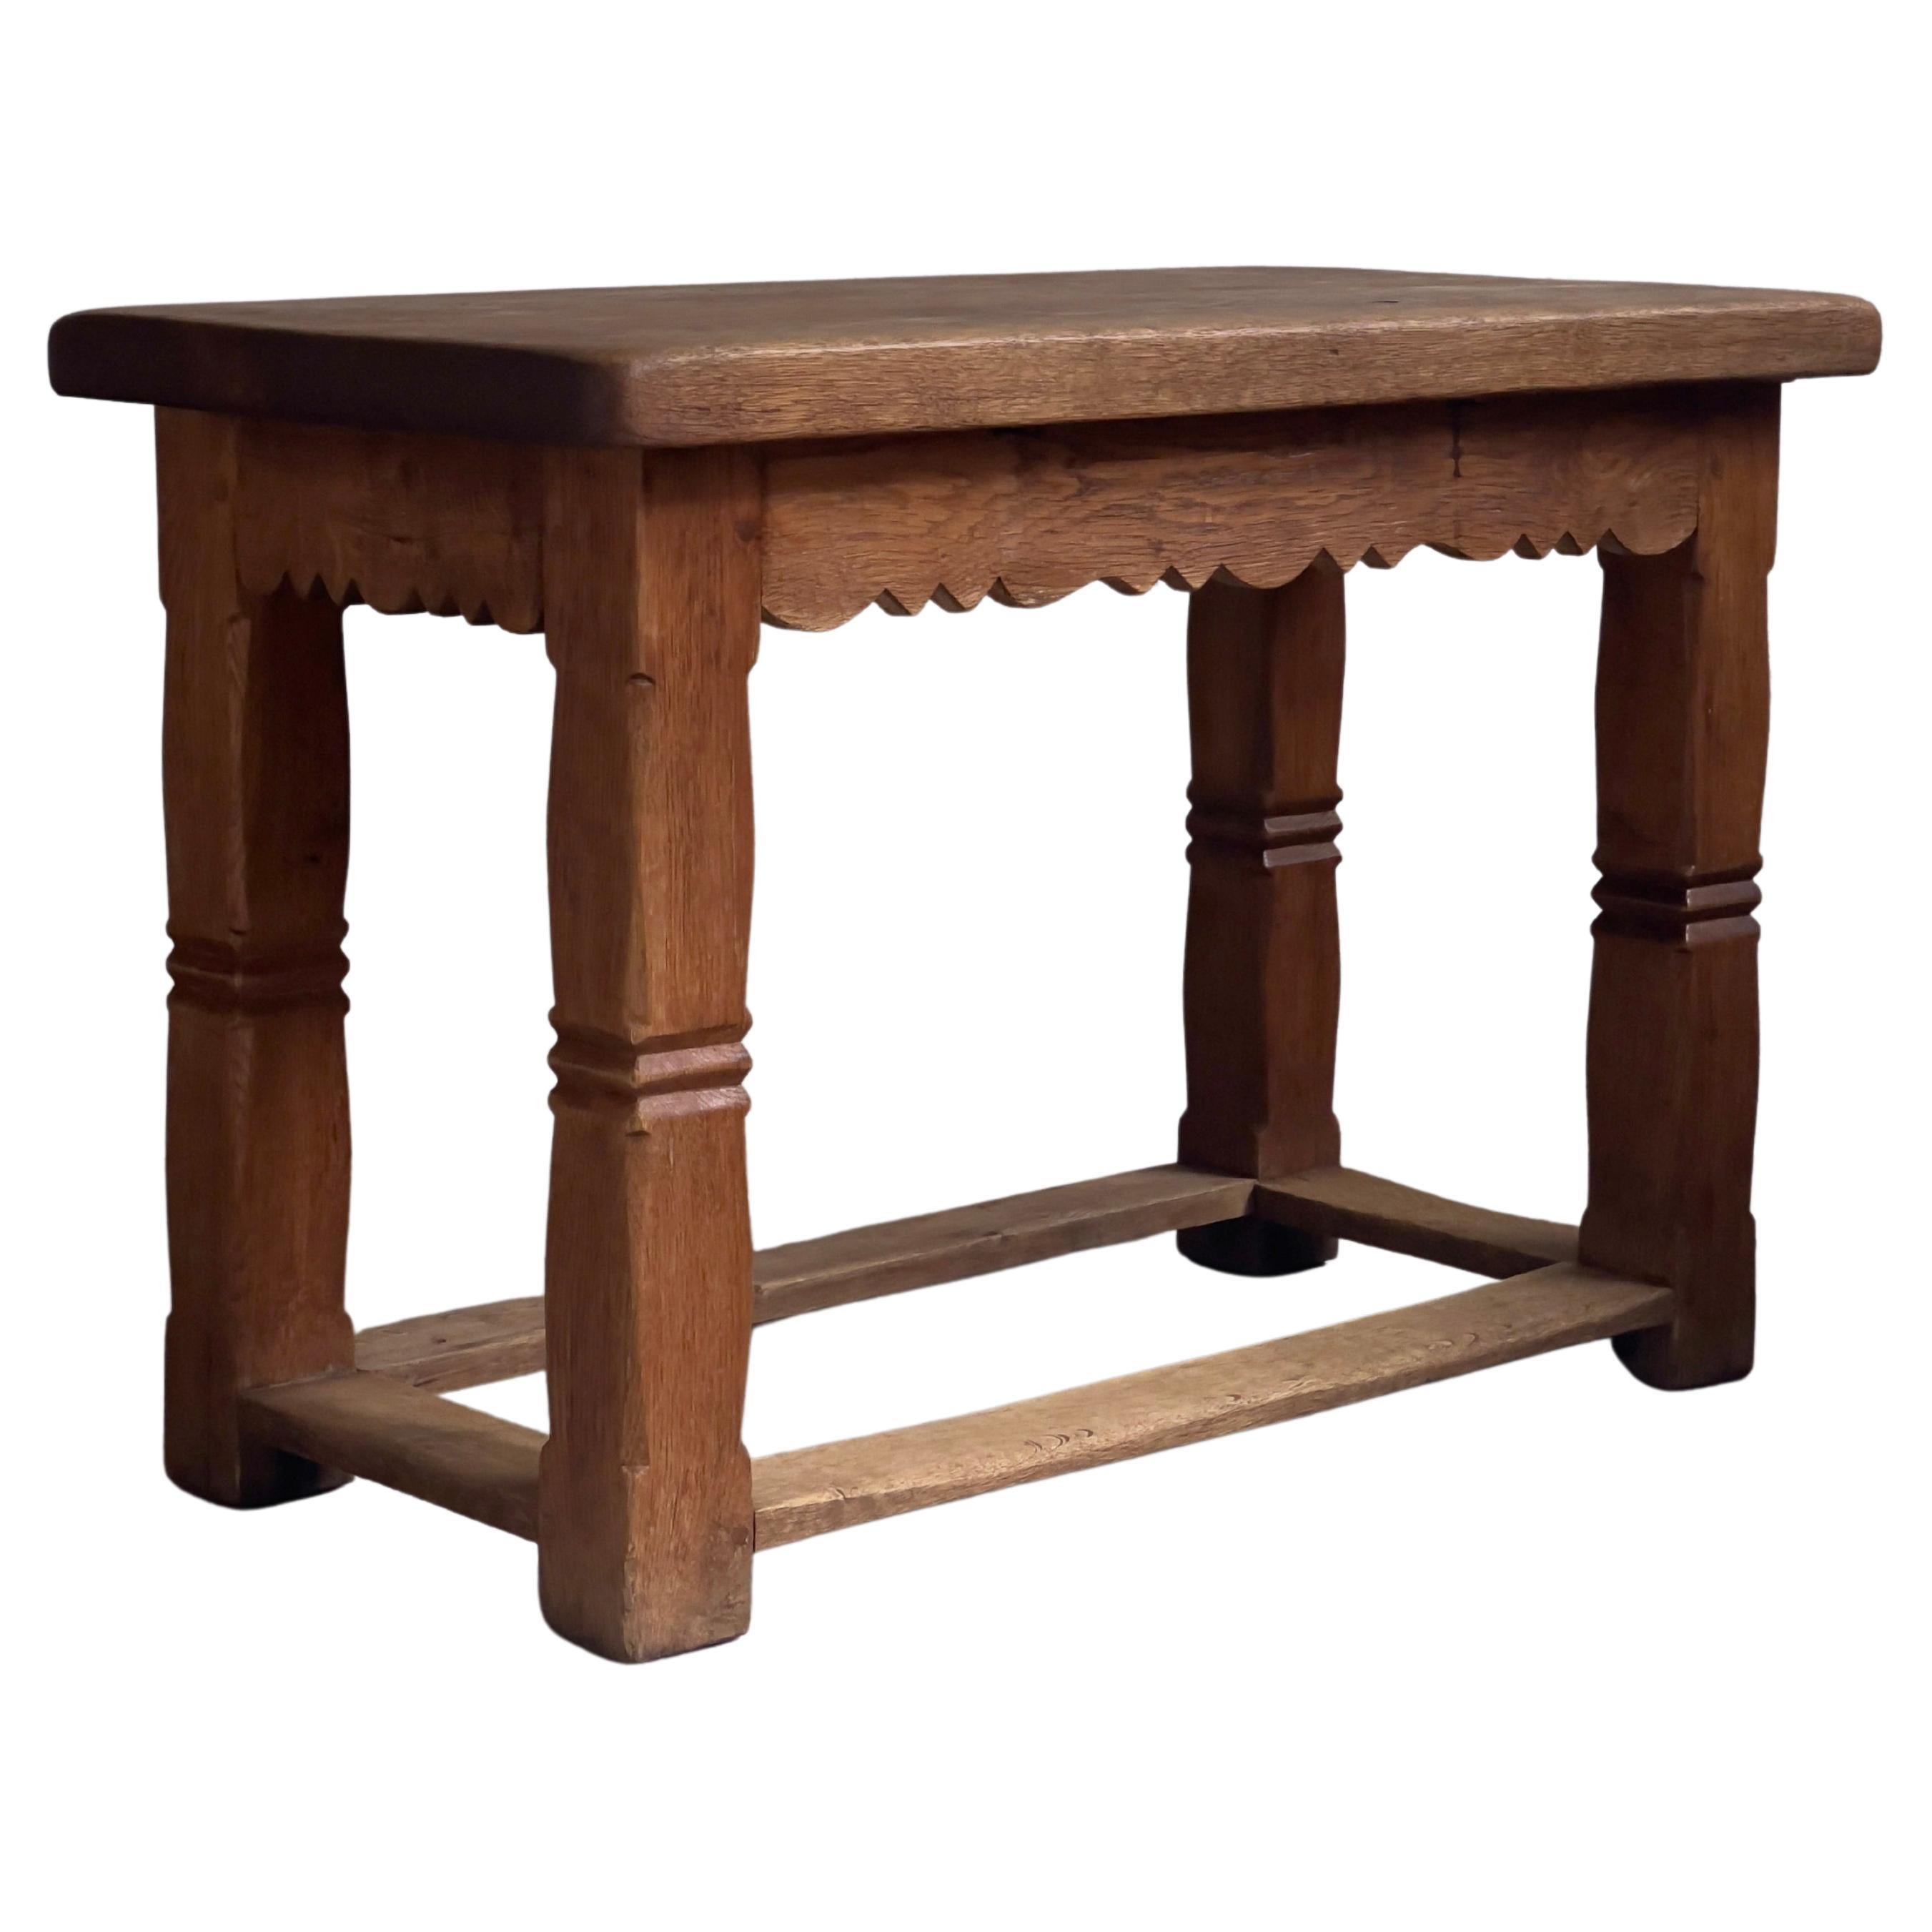 Original 1920s French Console Table in Patinated Solid Oak